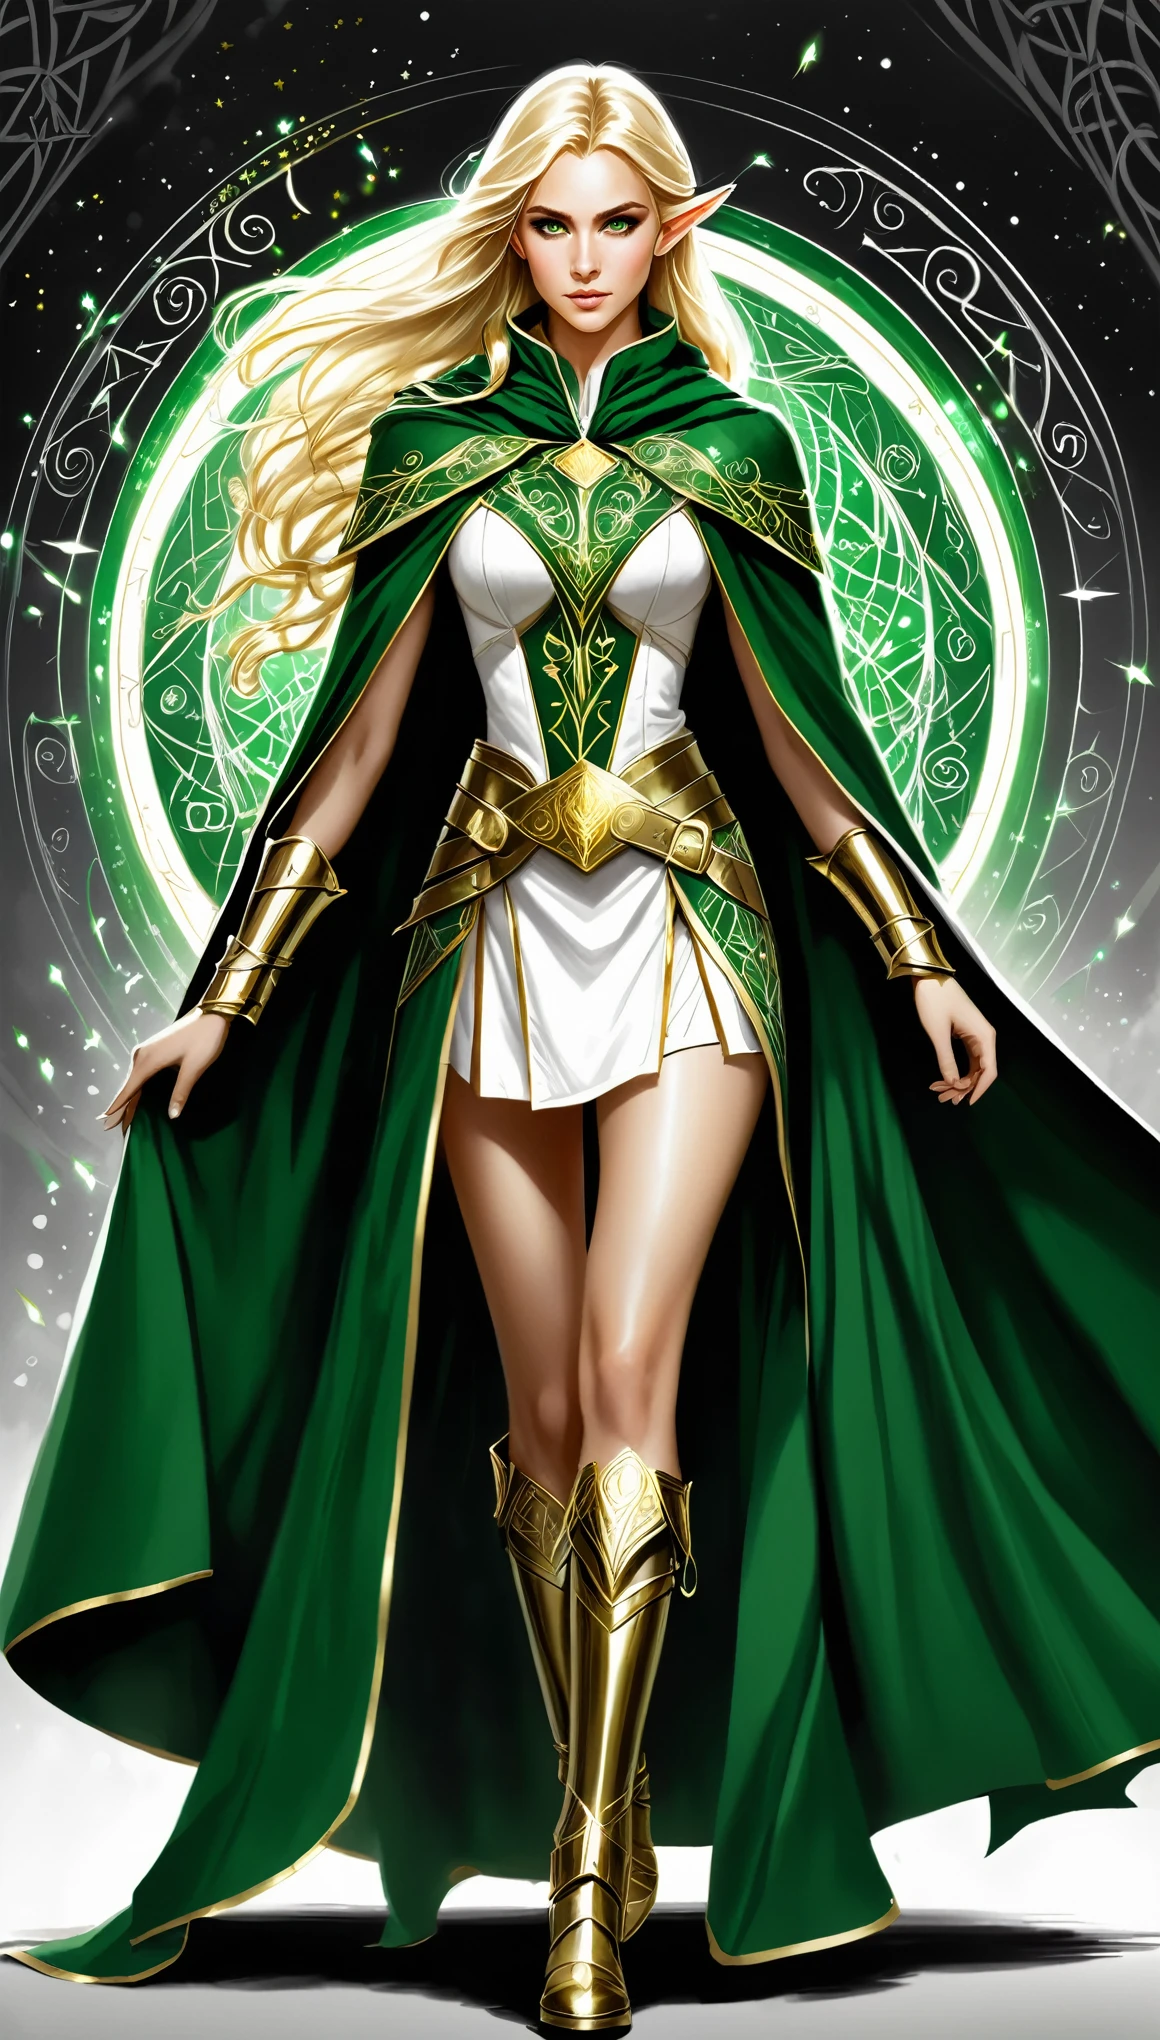 (Pencil_Sketch:1.2, messy lines, greyscale, traditional media, sketch),(((Masterpiece, highest quality, high definition, high detail)))), ((((Fantasy)))), one, (Elf woman)))), (short white skirt embroidered with gold), (Blonde long straight haine dark green eyes)))), (Green cloak armor with gold embroidery)), Big, (Strong wind), (Cast spells)), (A lot of glowing grains are flying), ((( A vortex of light gathers in the hand))), (((Magic circle of light densely drawn with geometric patterns and magic letters in the background))), ((Many glowing green arrows are released)), forest, magic circle reflected in cloak